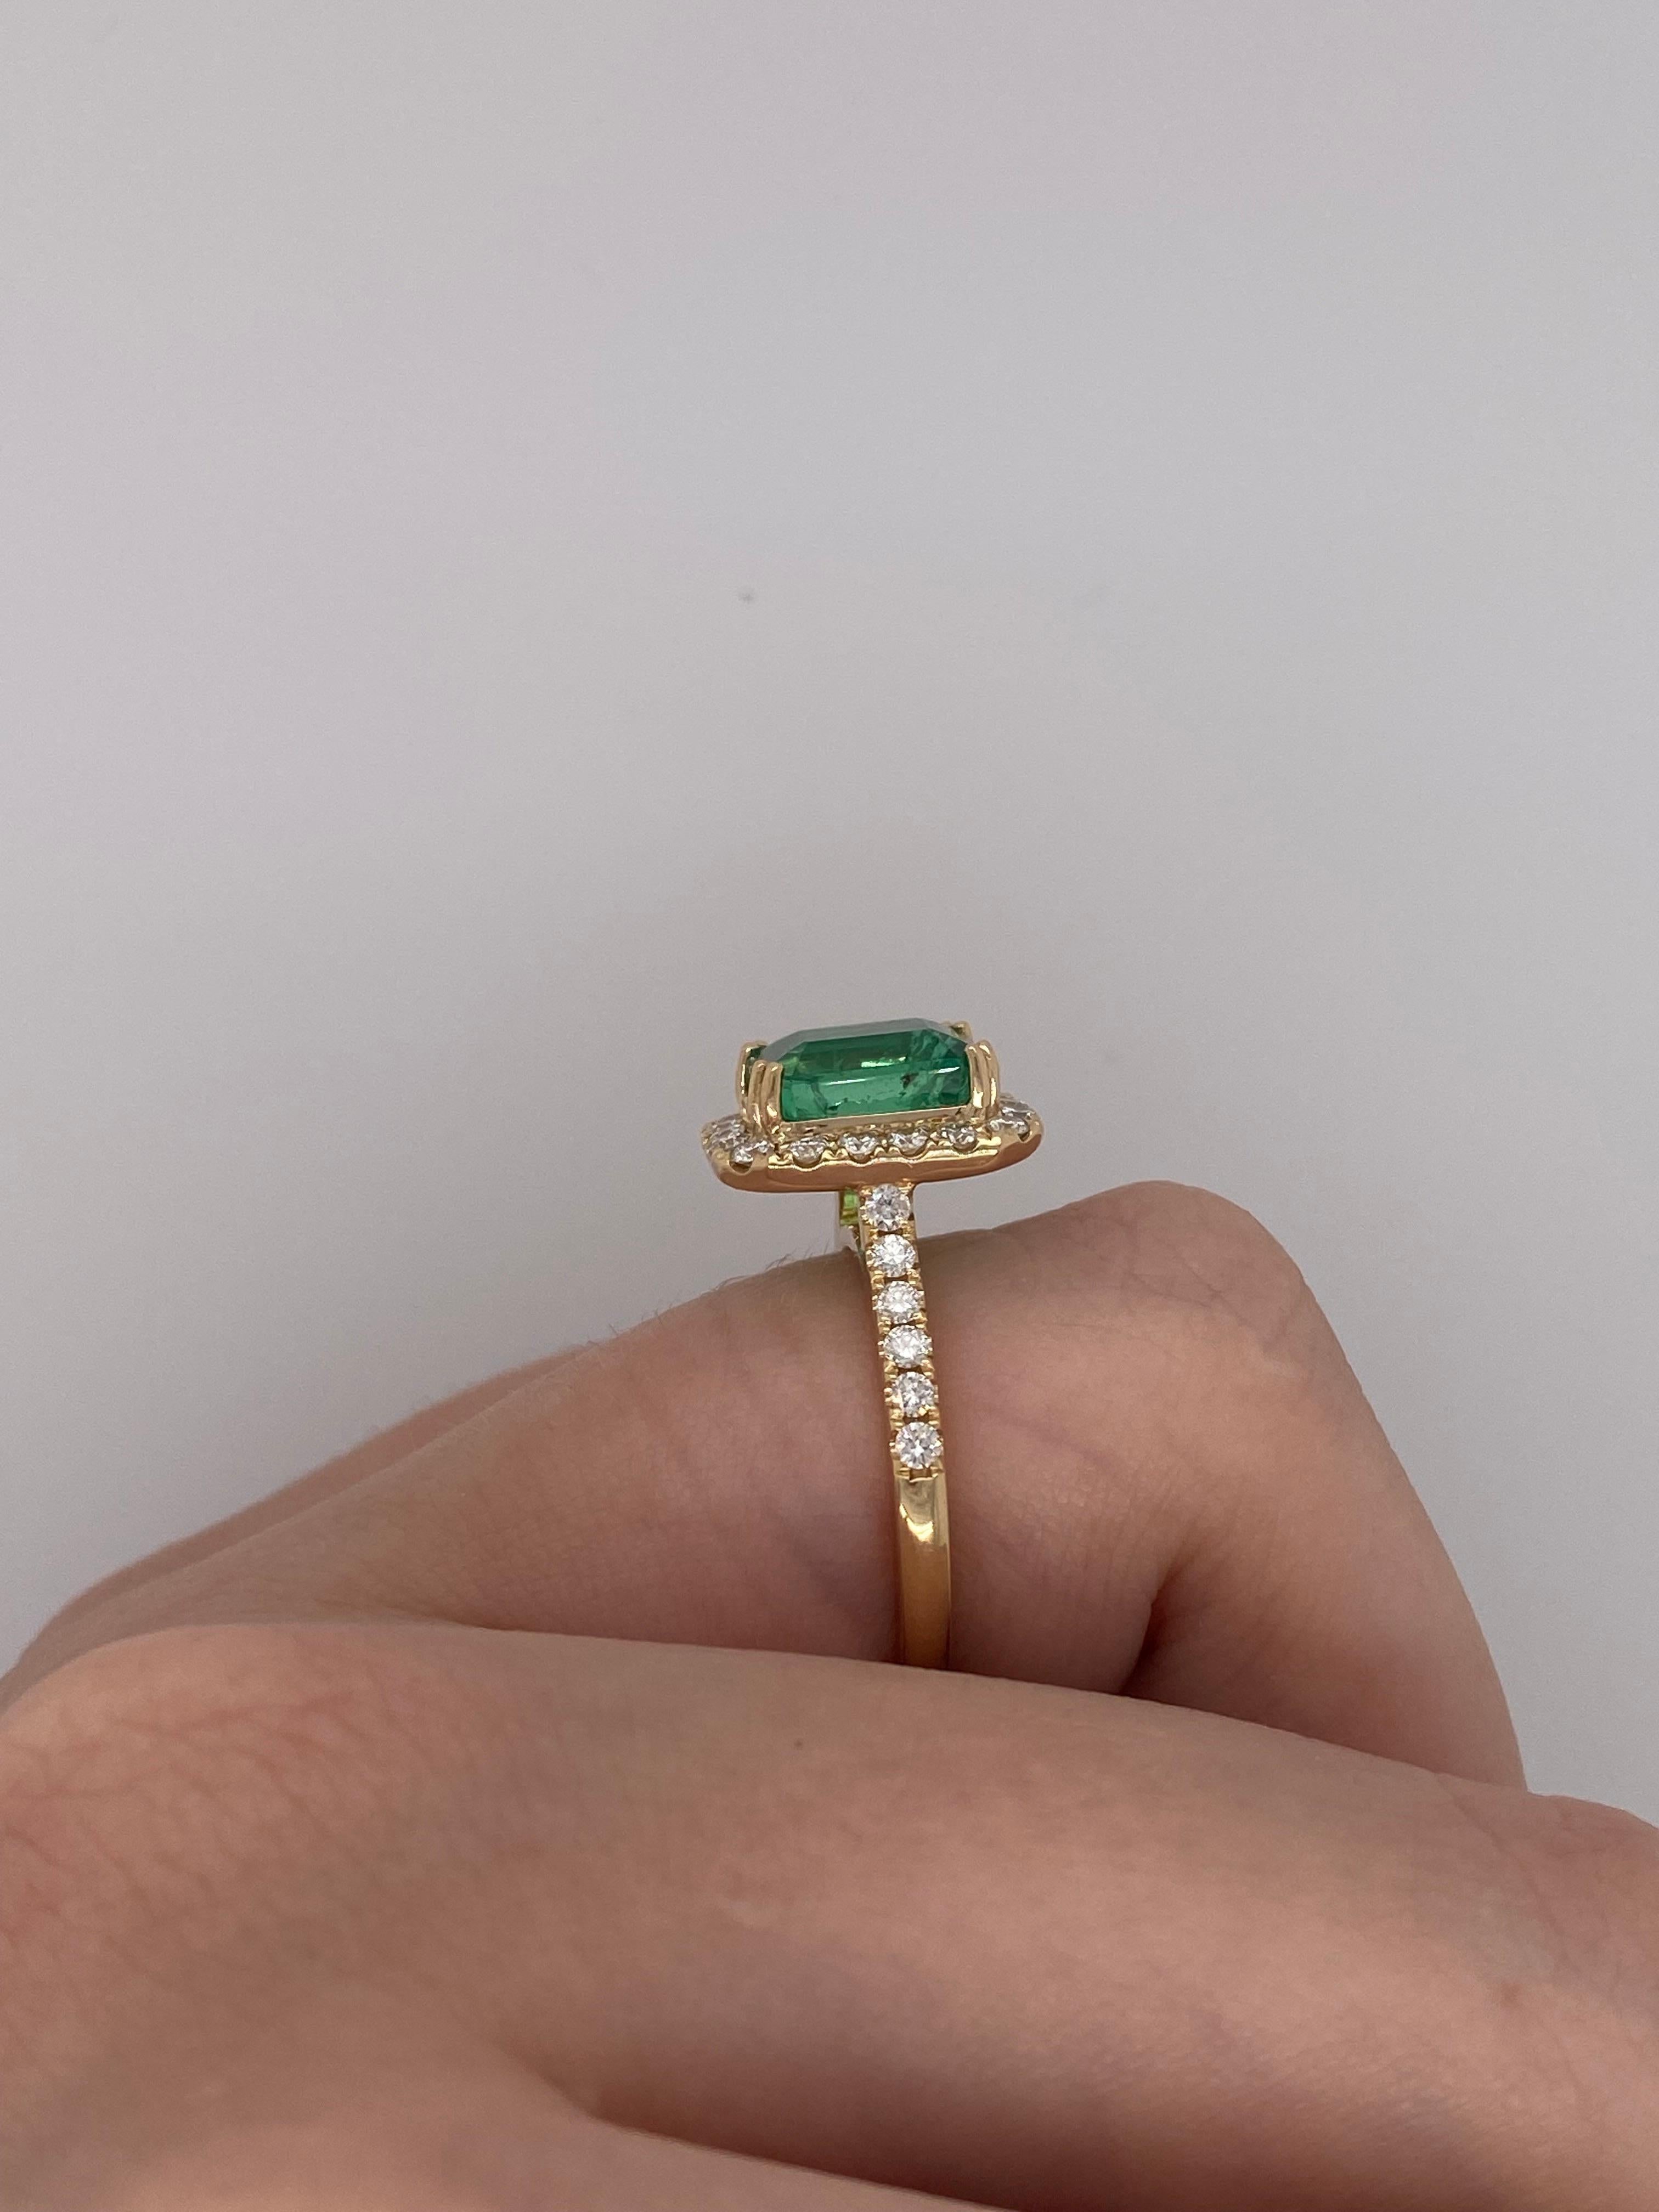 Emerald Cut 3 Carat Zambian Emerald And Diamond Halo Ring In 18k Yellow Gold For Sale